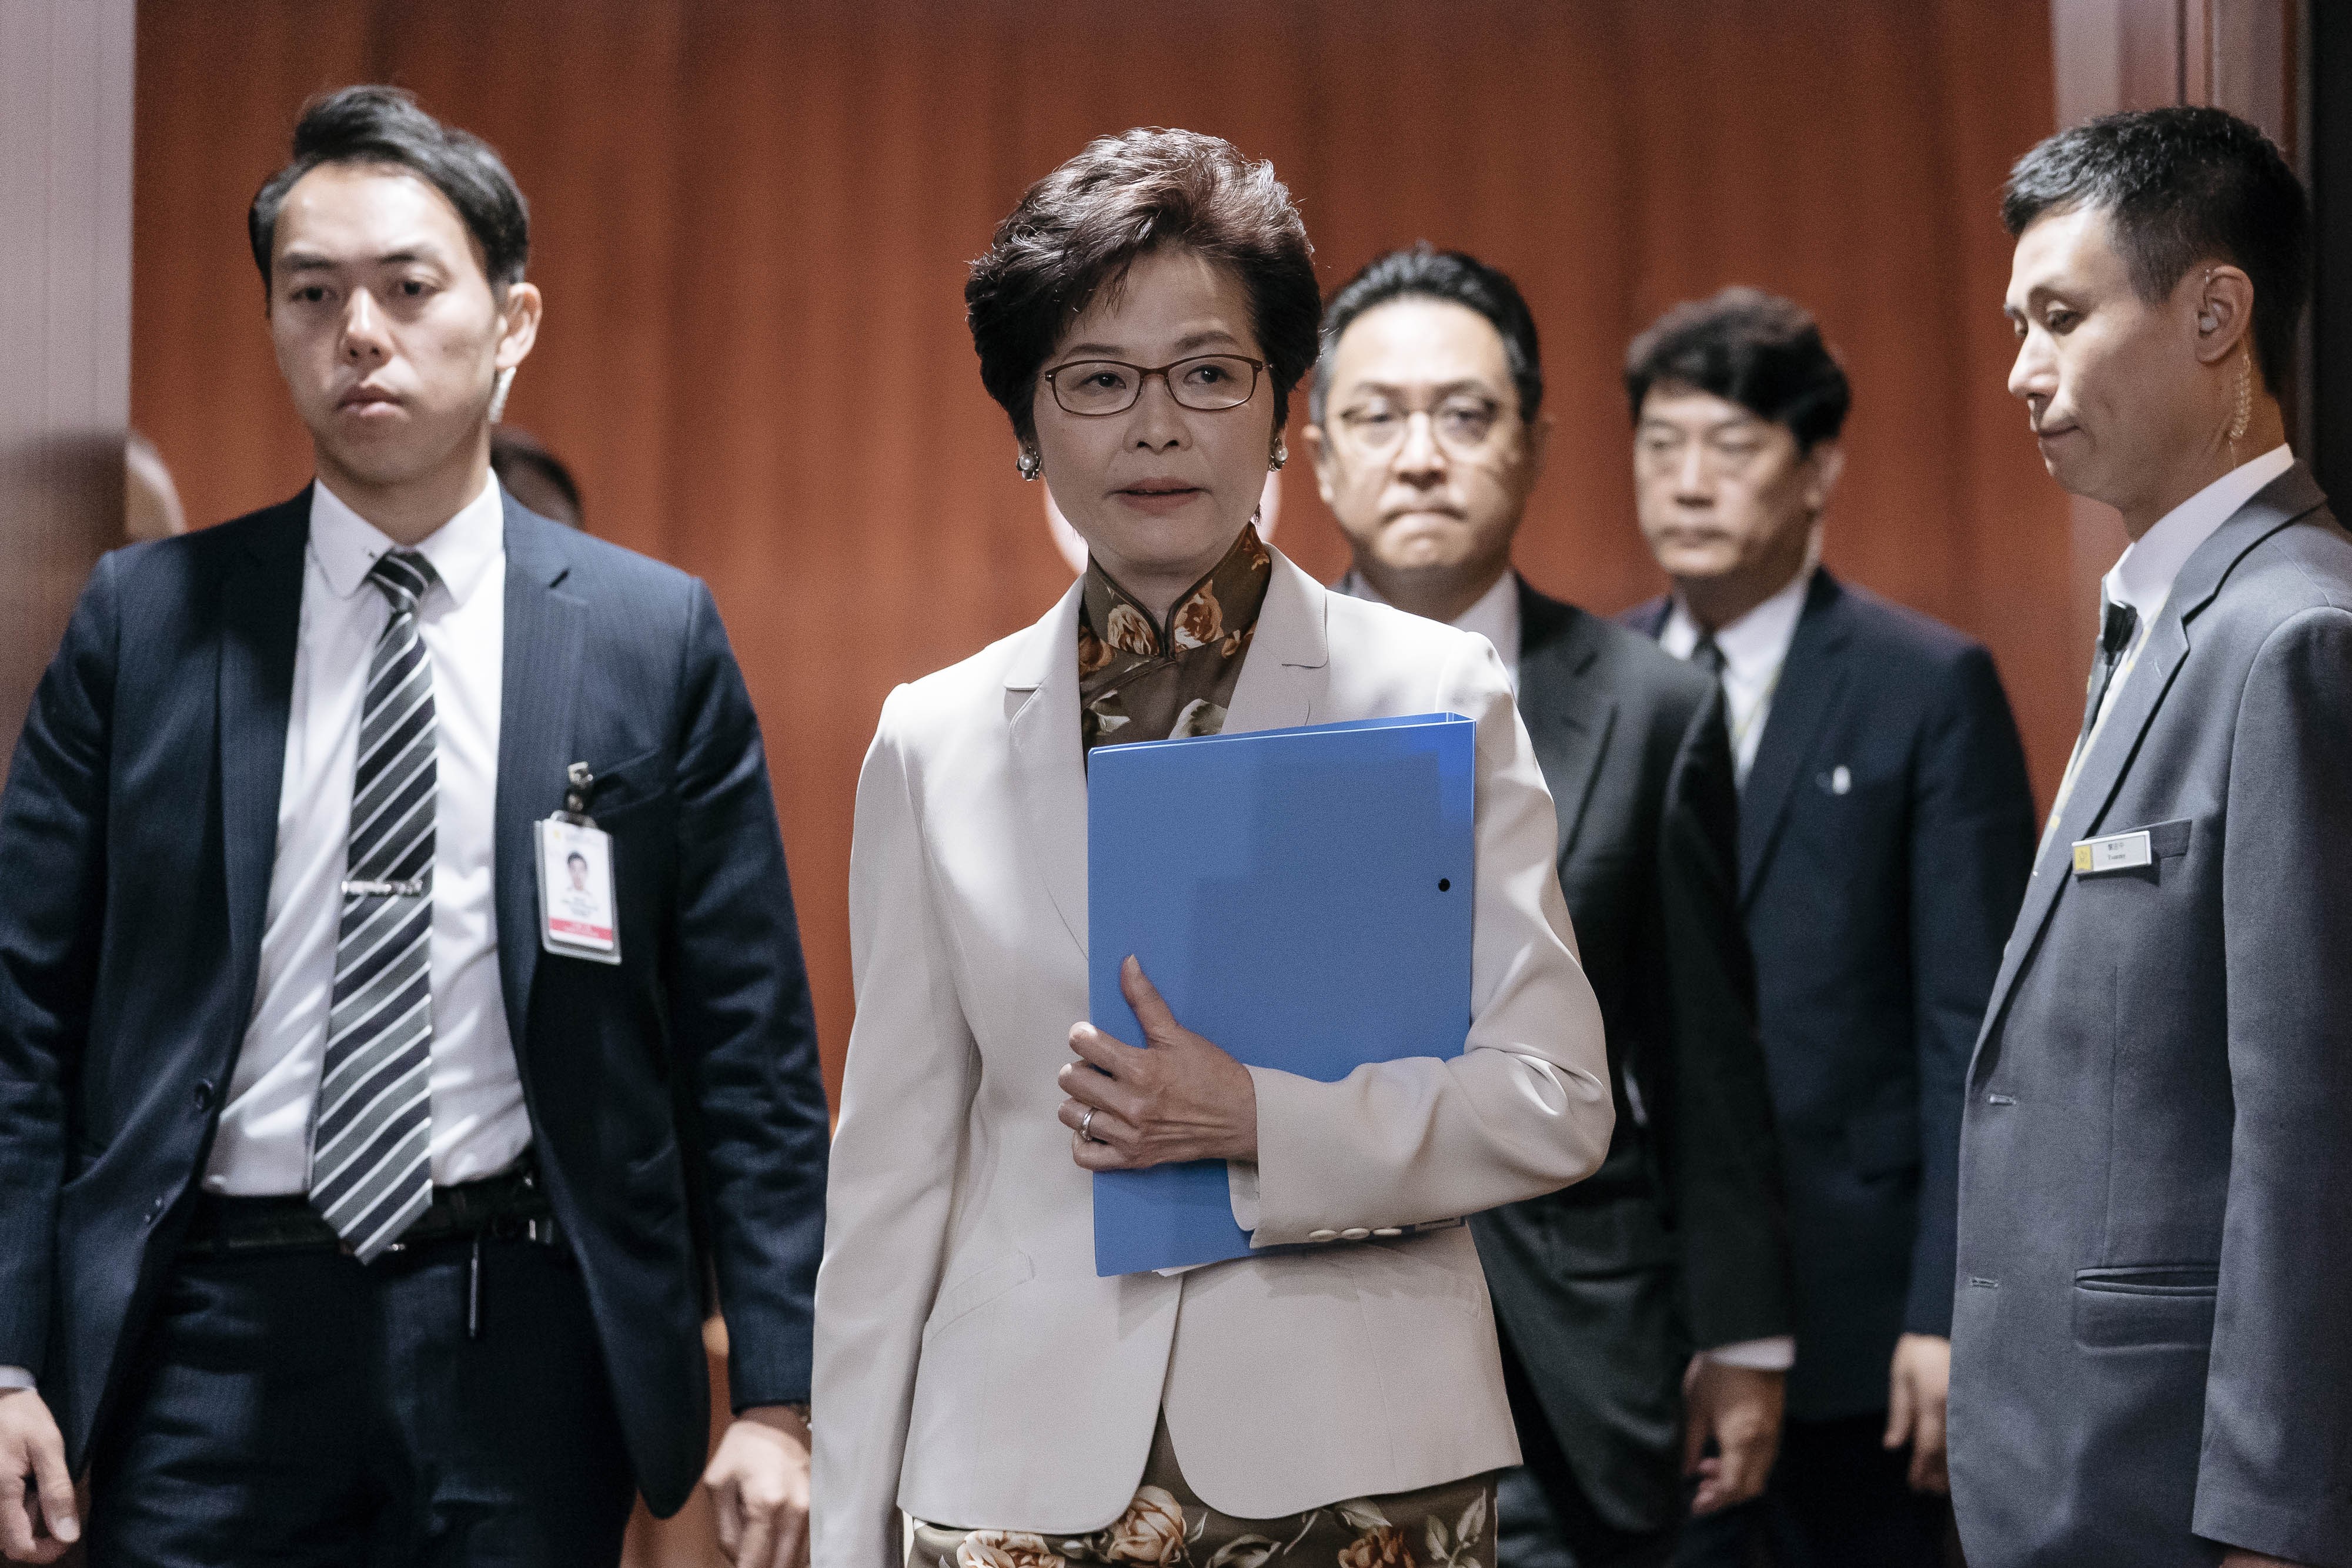 Hong Kong Chief Executive Carrie Lam leaves the Legislative Council chamber after delivering her policy address on October 11. Photo: Bloomberg